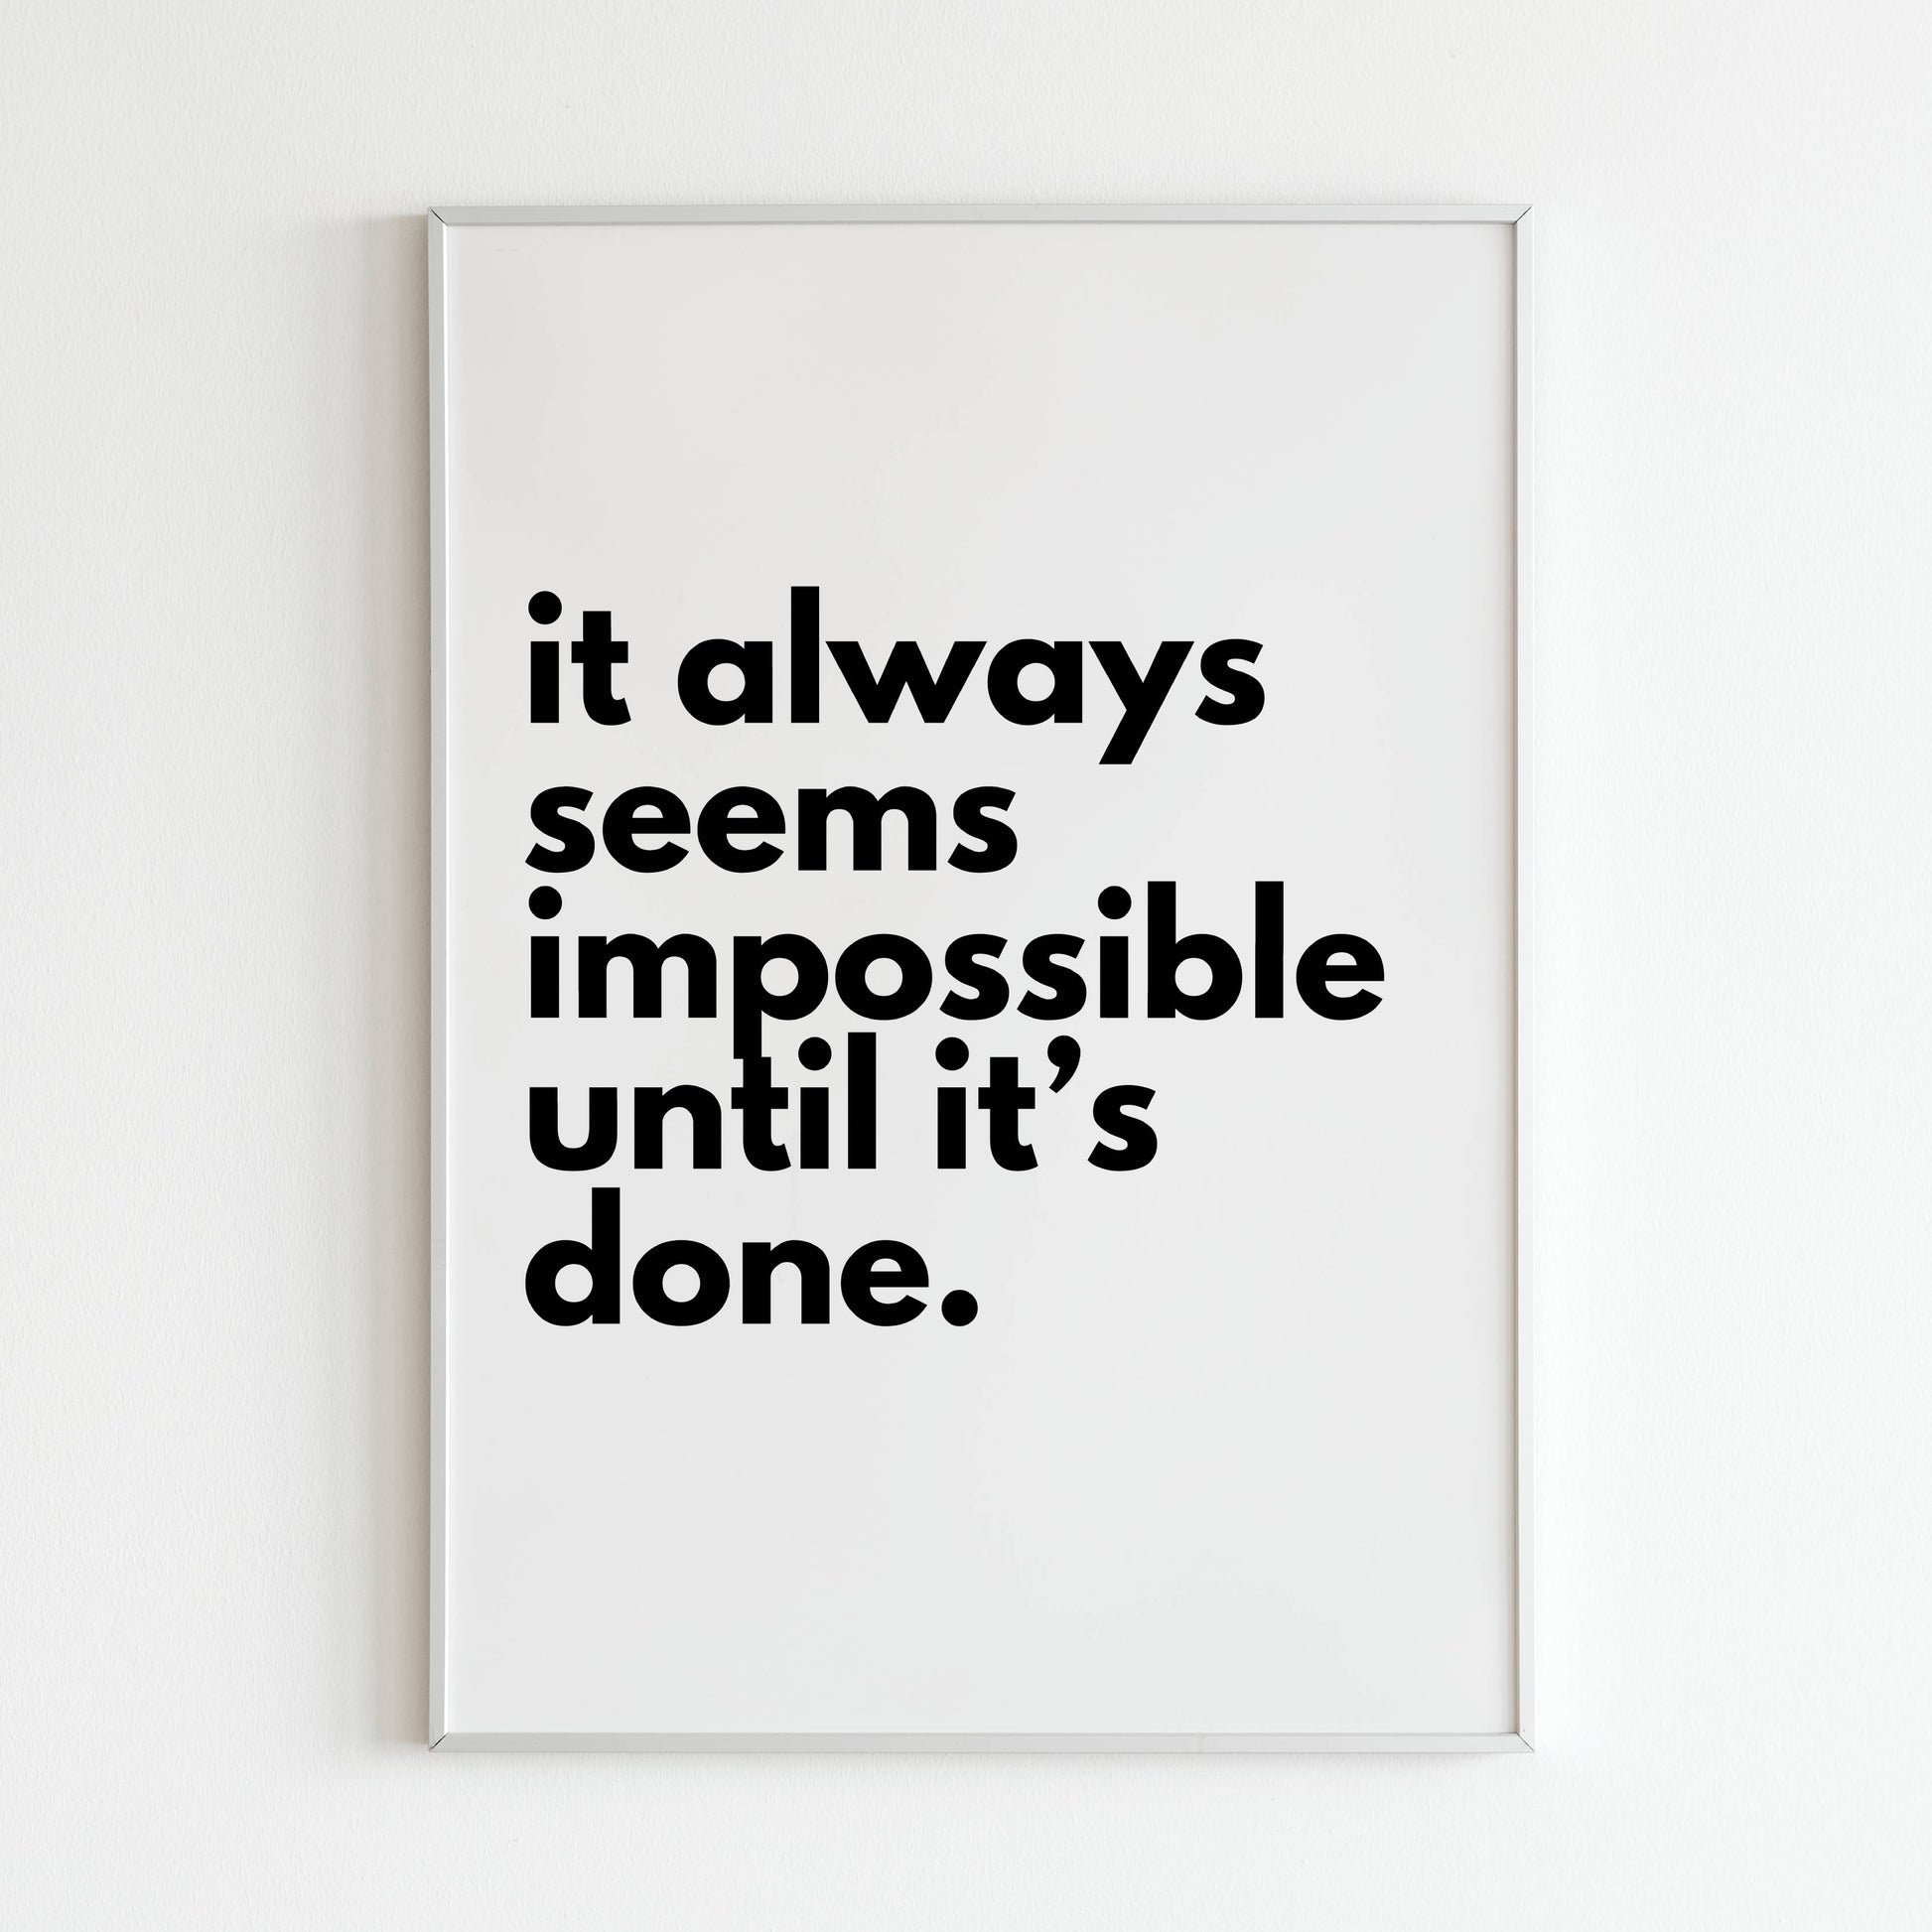 Downloadable Nelson Mandela quote "It always seems impossible until it's done" wall art.